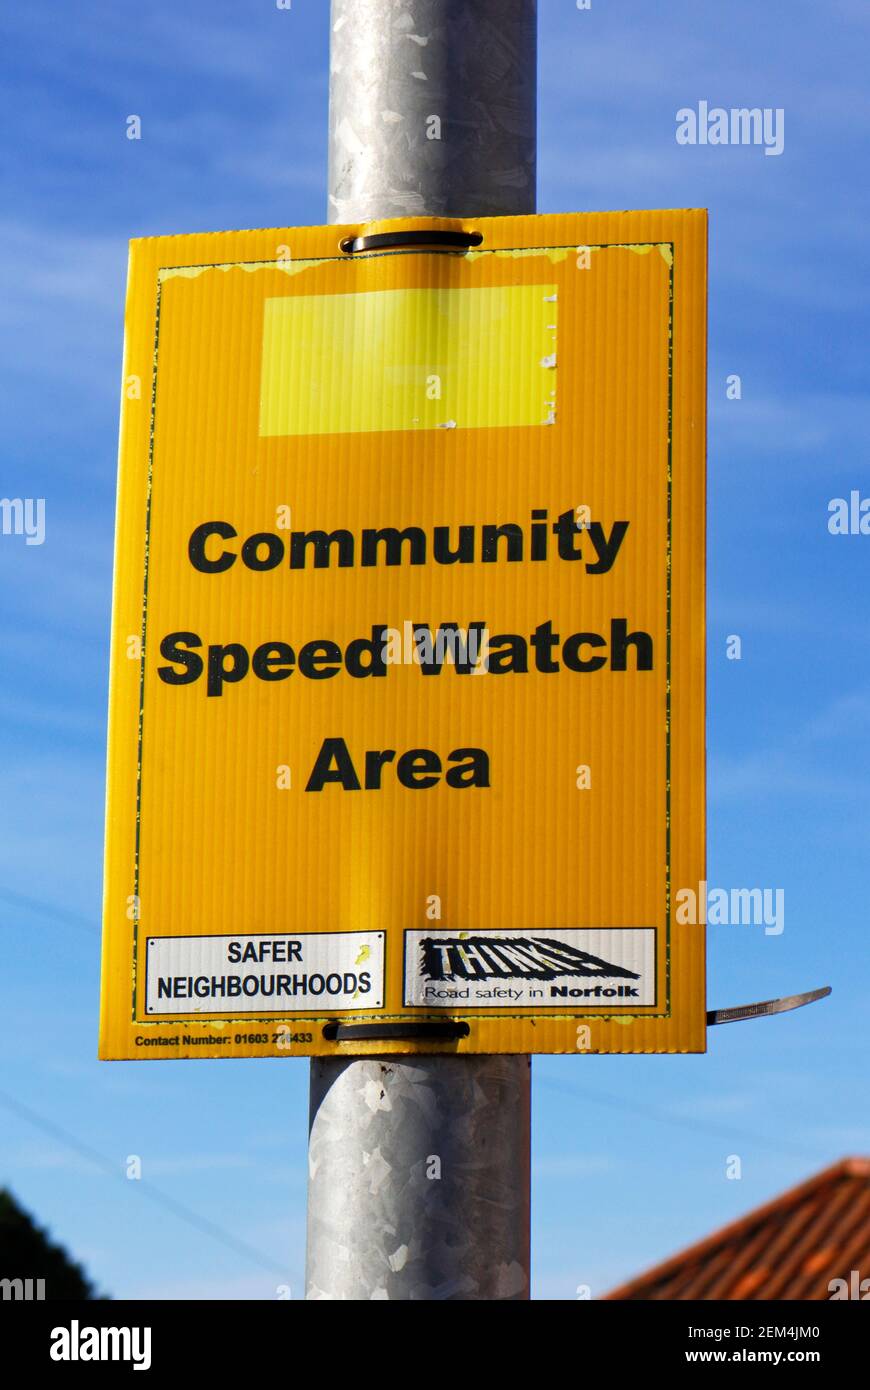 A Community Speed Watch Area sign in a residential area in Hellesdon, Norfolk, England, United Kingdom. Stock Photo